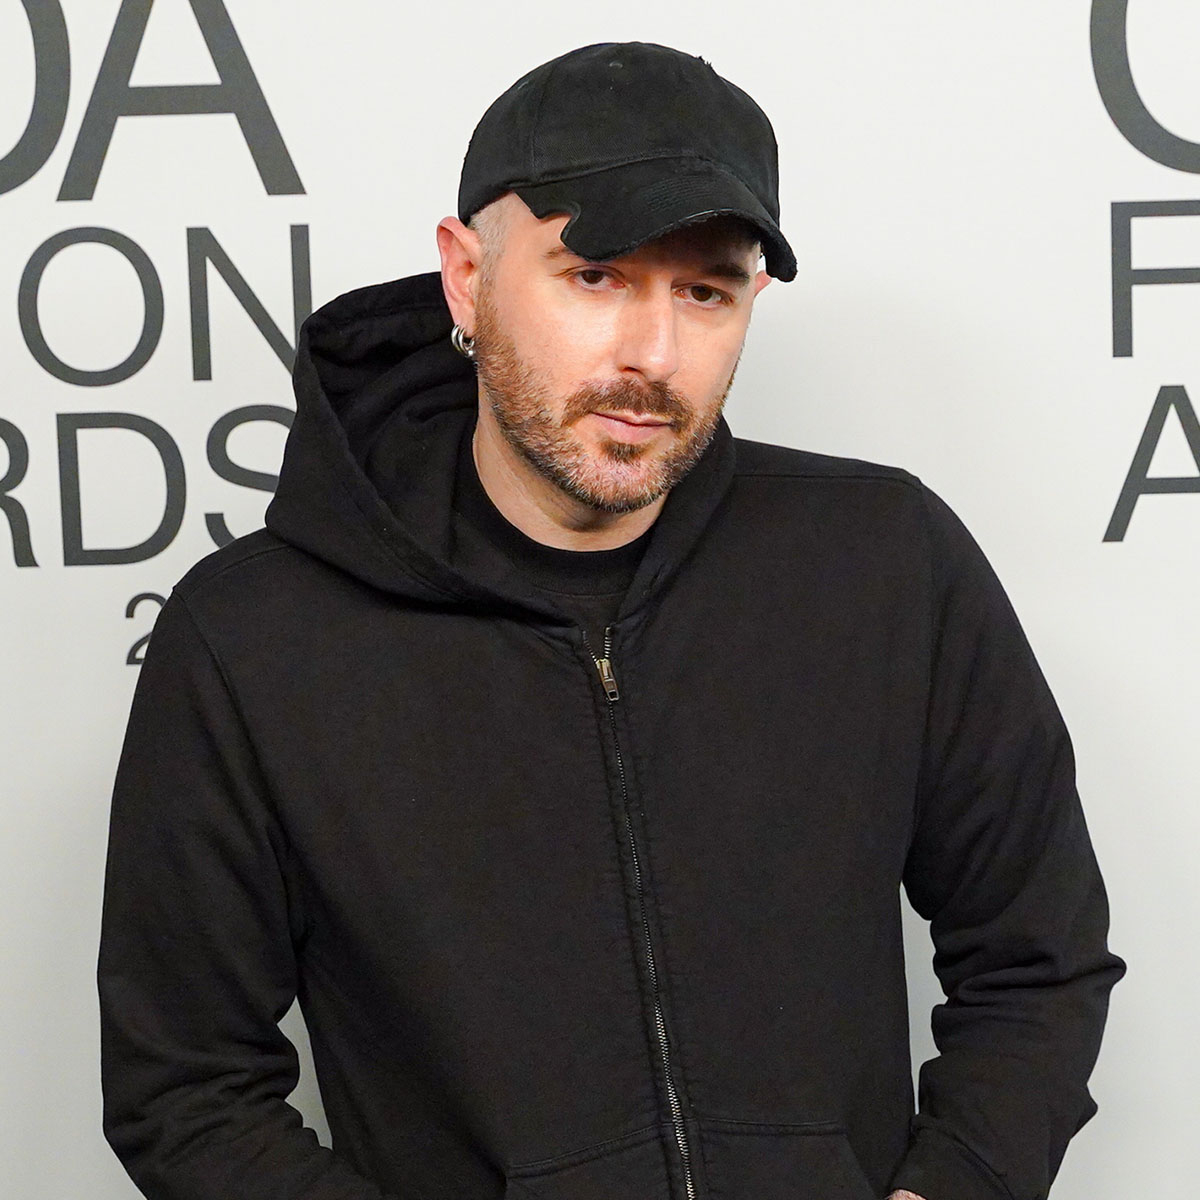 5 Things To Know About Demna Gvasalia, Balenciaga's New Artistic